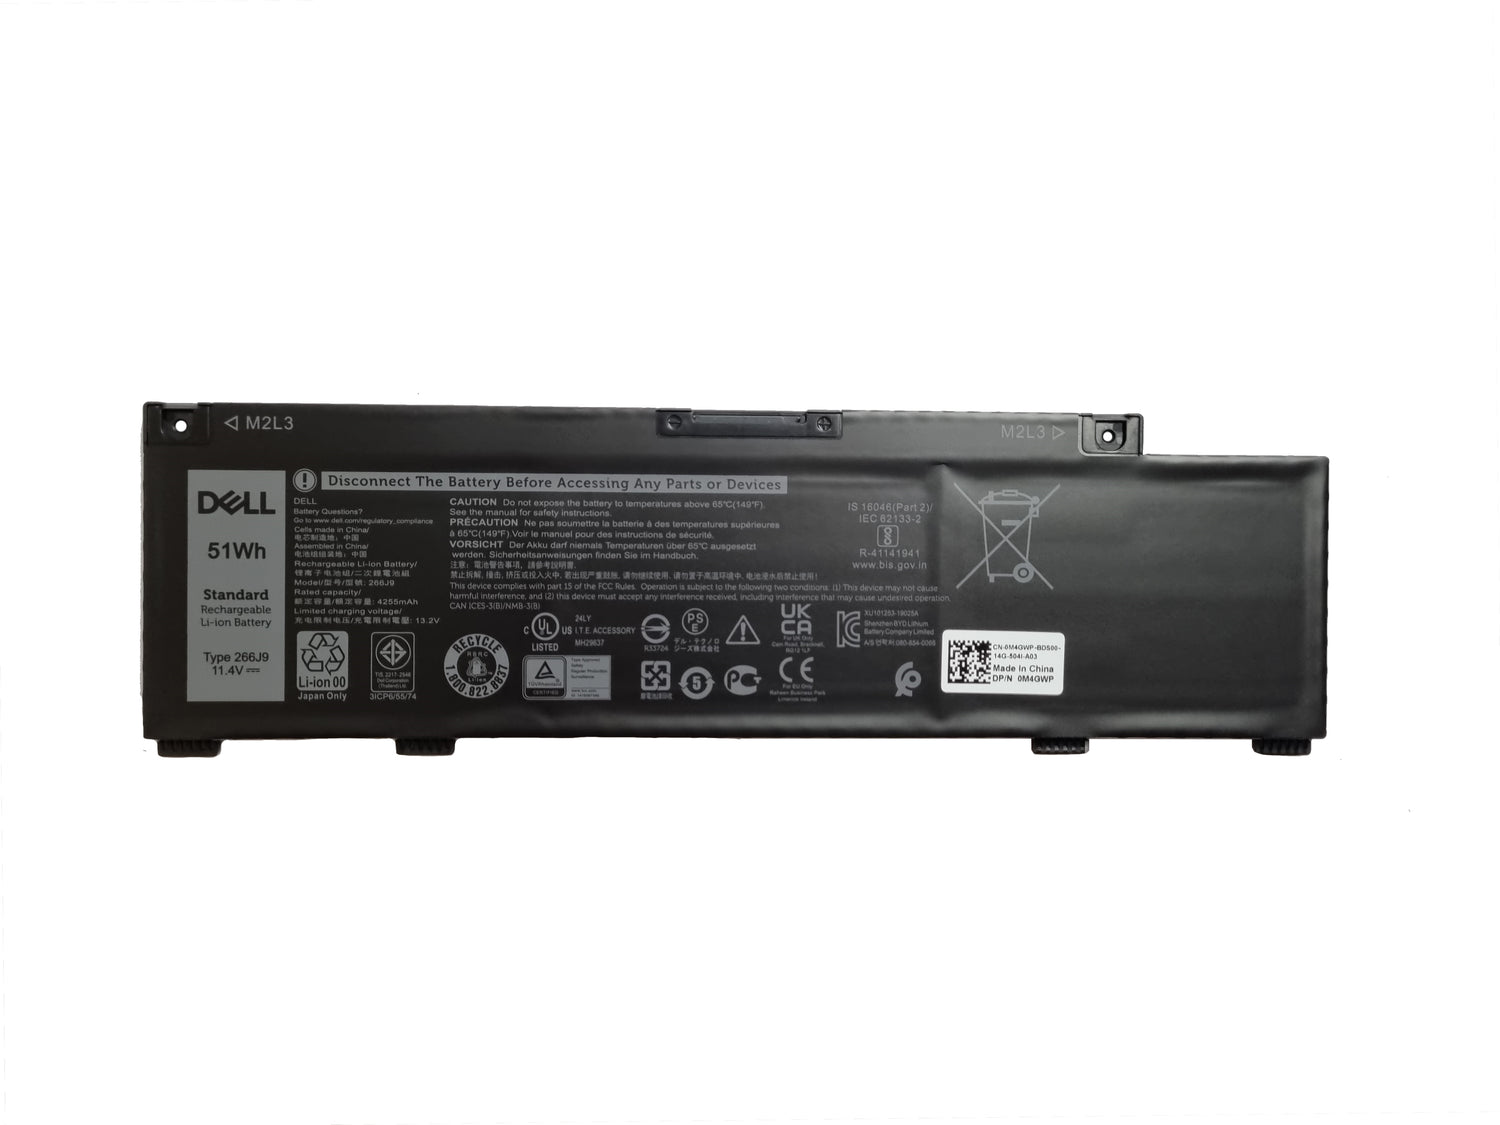 Dell Inspiron 5490 G3 3590 51wh 3 Cell Battery 266j9 M4gwp Pn1vn Black Cat Pc Providing Dell Parts Since 1998